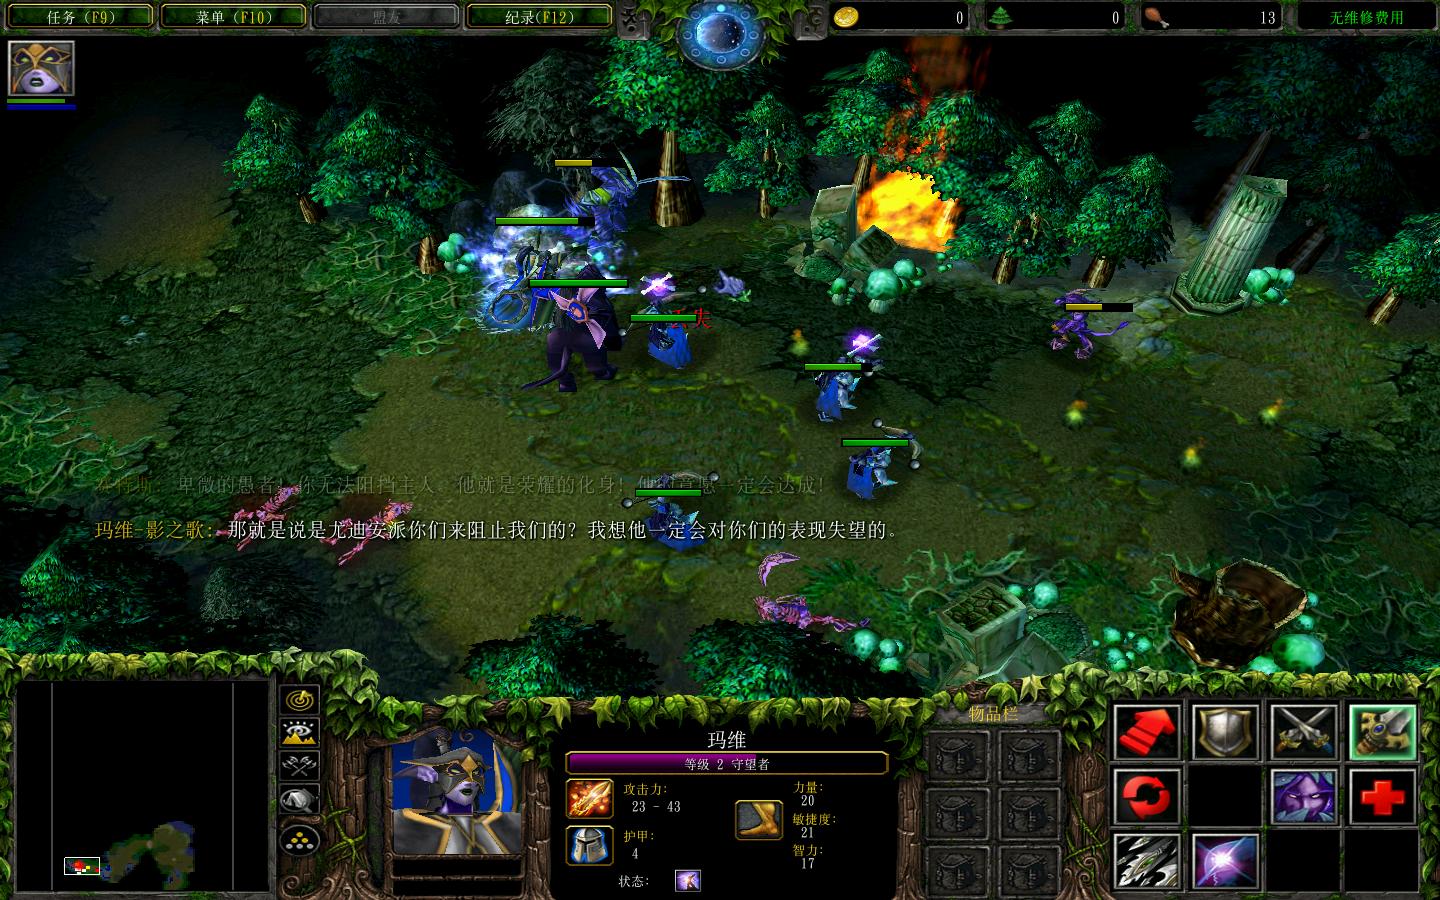 ħ3Warcraft III The Frozen Thronev1.24E-Ѱ1.0ʽ